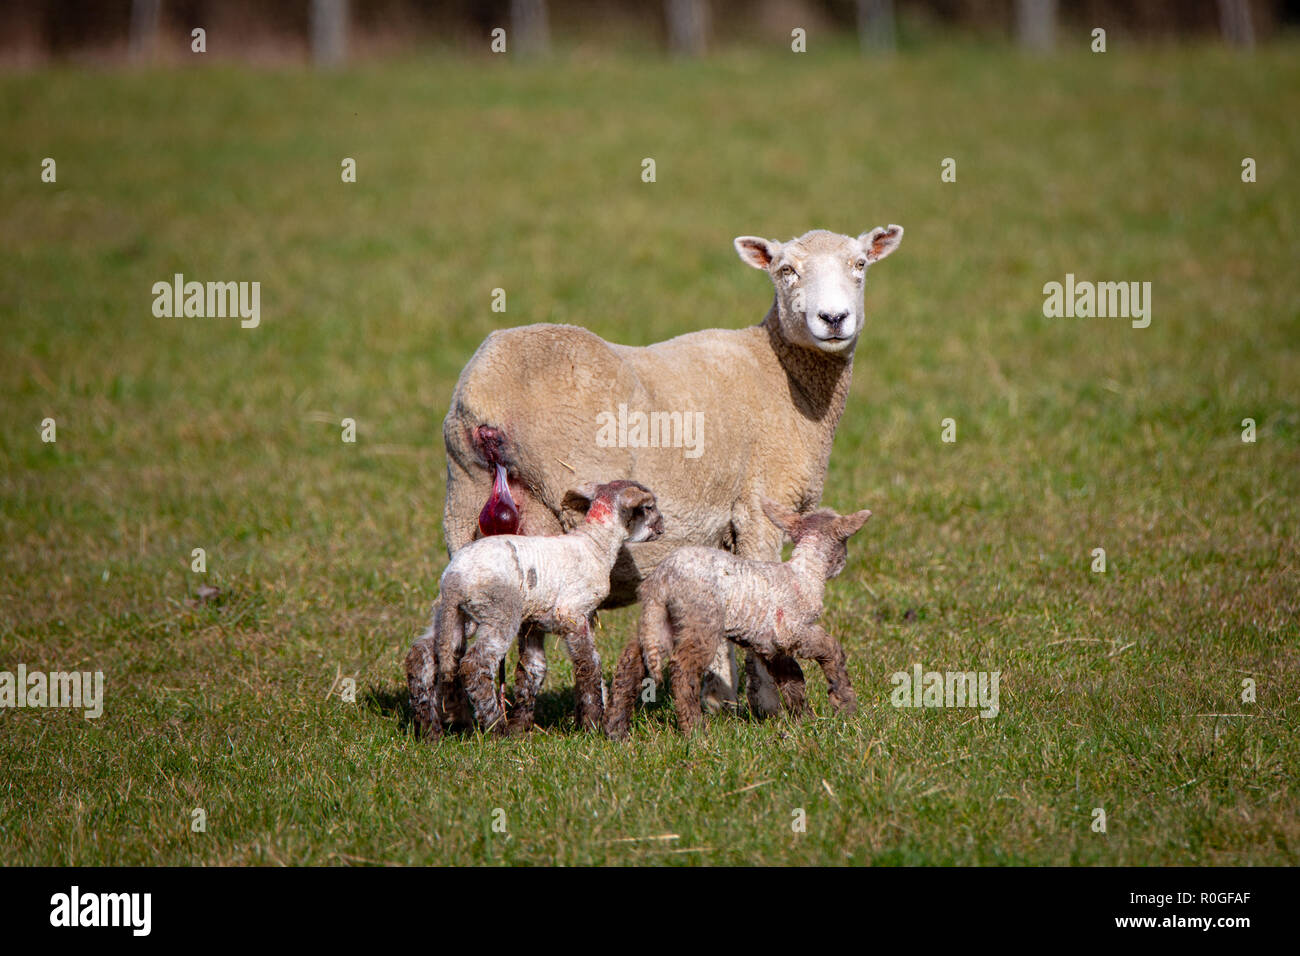 A ewe has just given birth to twin lambs with brown legs in a field on a farm Stock Photo